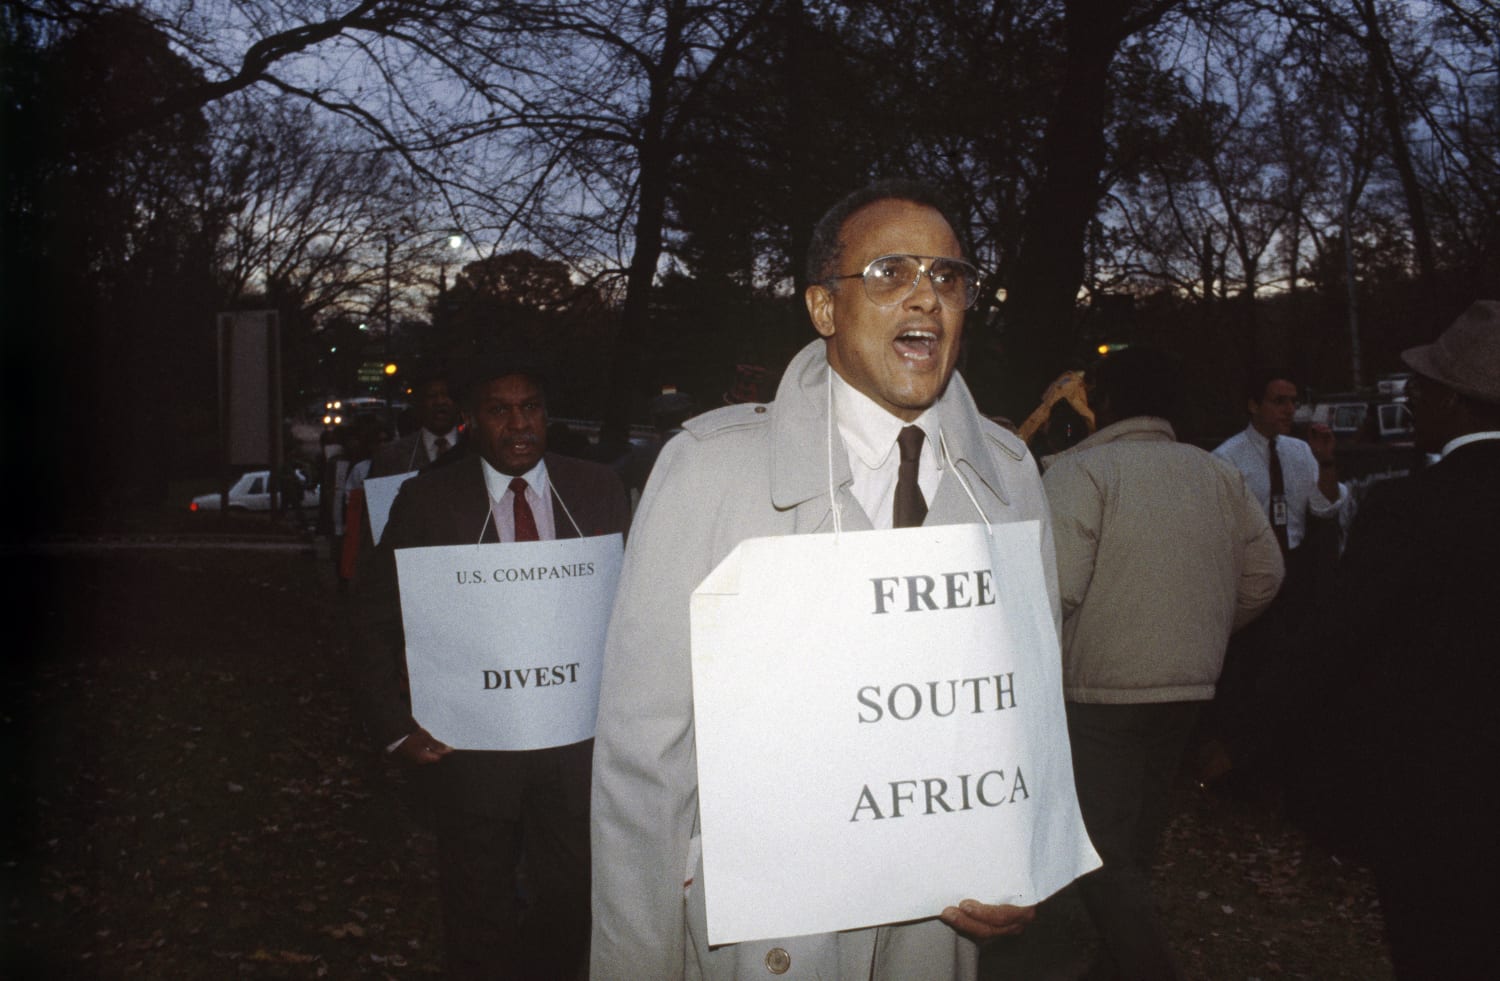 Harry Belafonte's activism was fueled by his pride in Black people